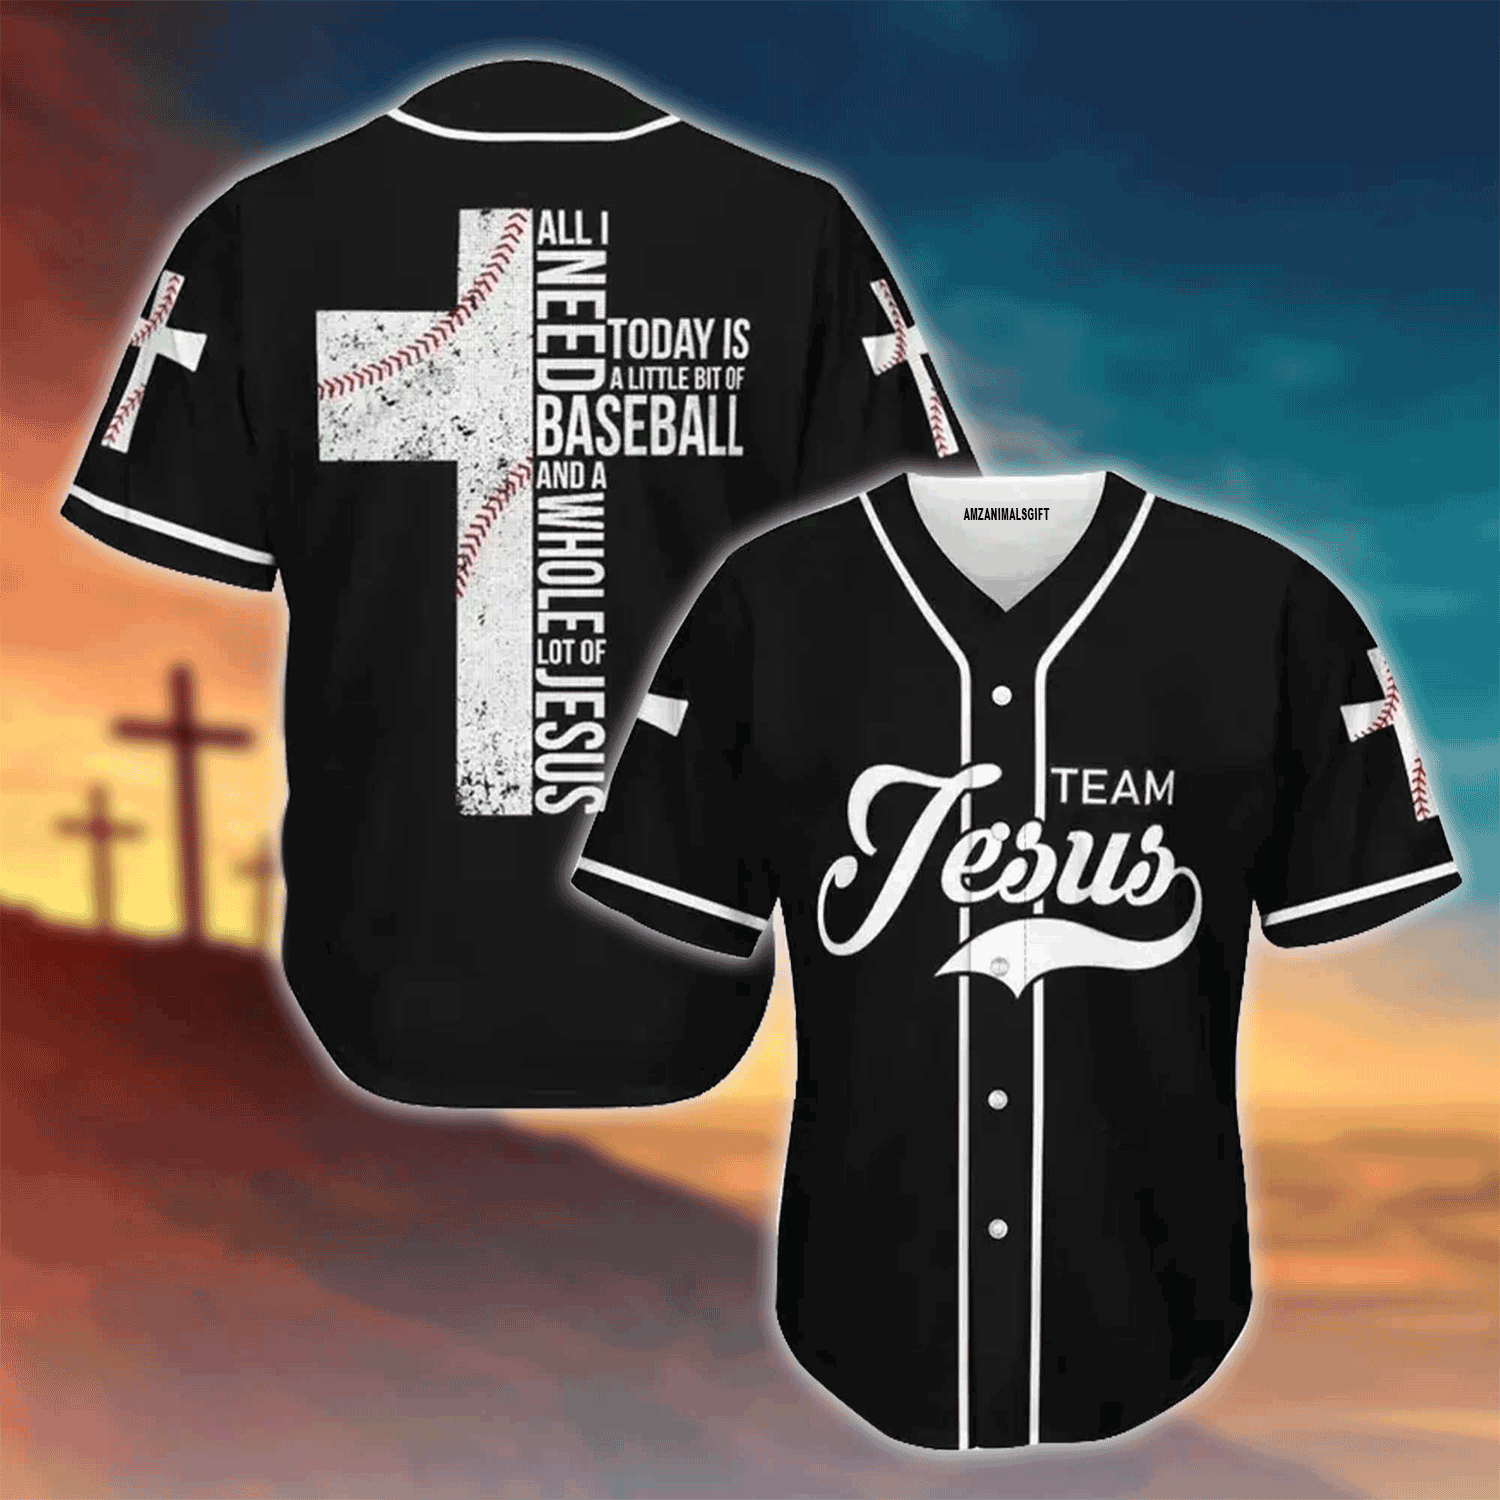 Jesus Baseball Jersey Shirt - All I Need Today Is A Whole Lot Of Jesus Baseball Jersey Shirt For Men & Women, Perfect Gift For Christian